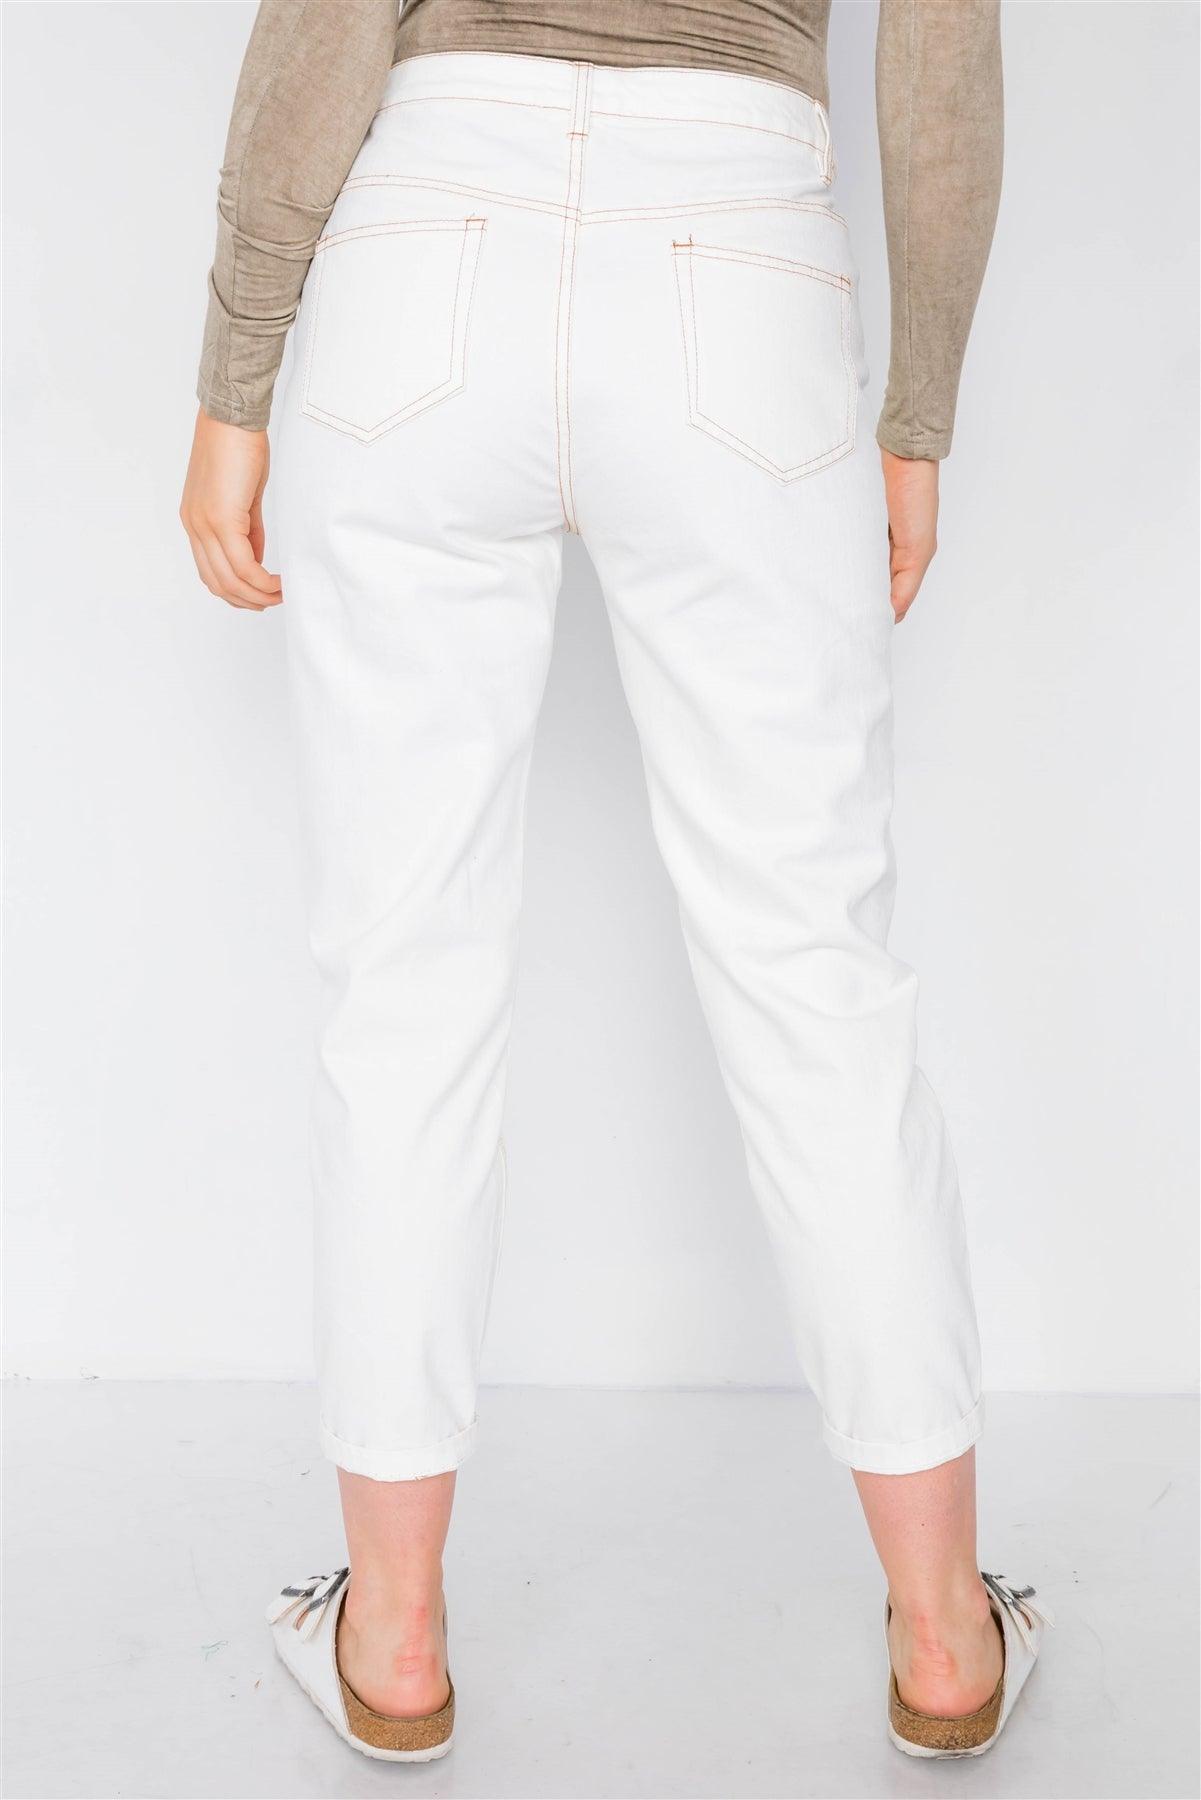 Off White With Brown Stitching Jeans /3-2-1